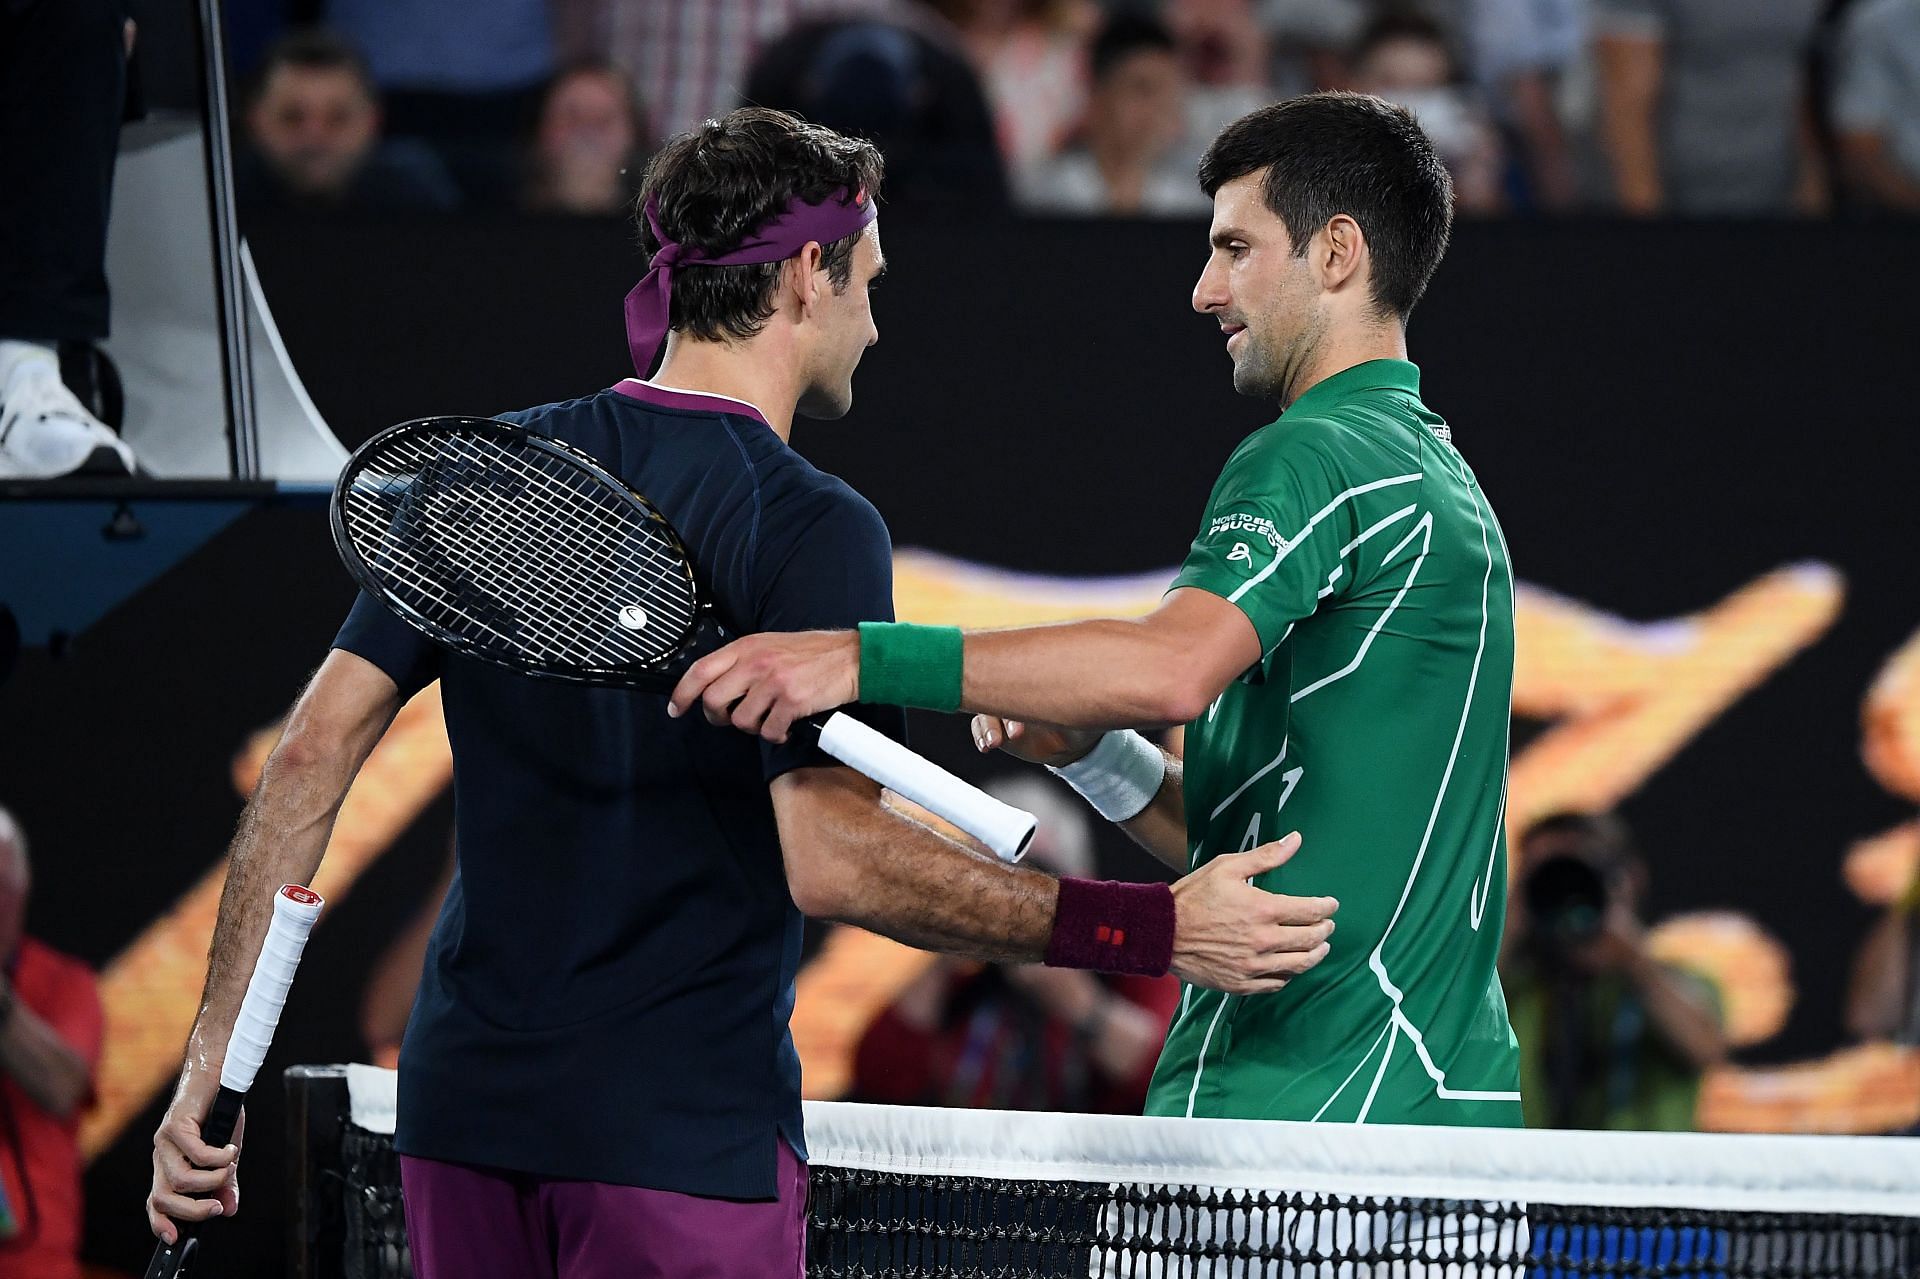 Djokovic and Federer at the 2020 Australian Open - Day 11